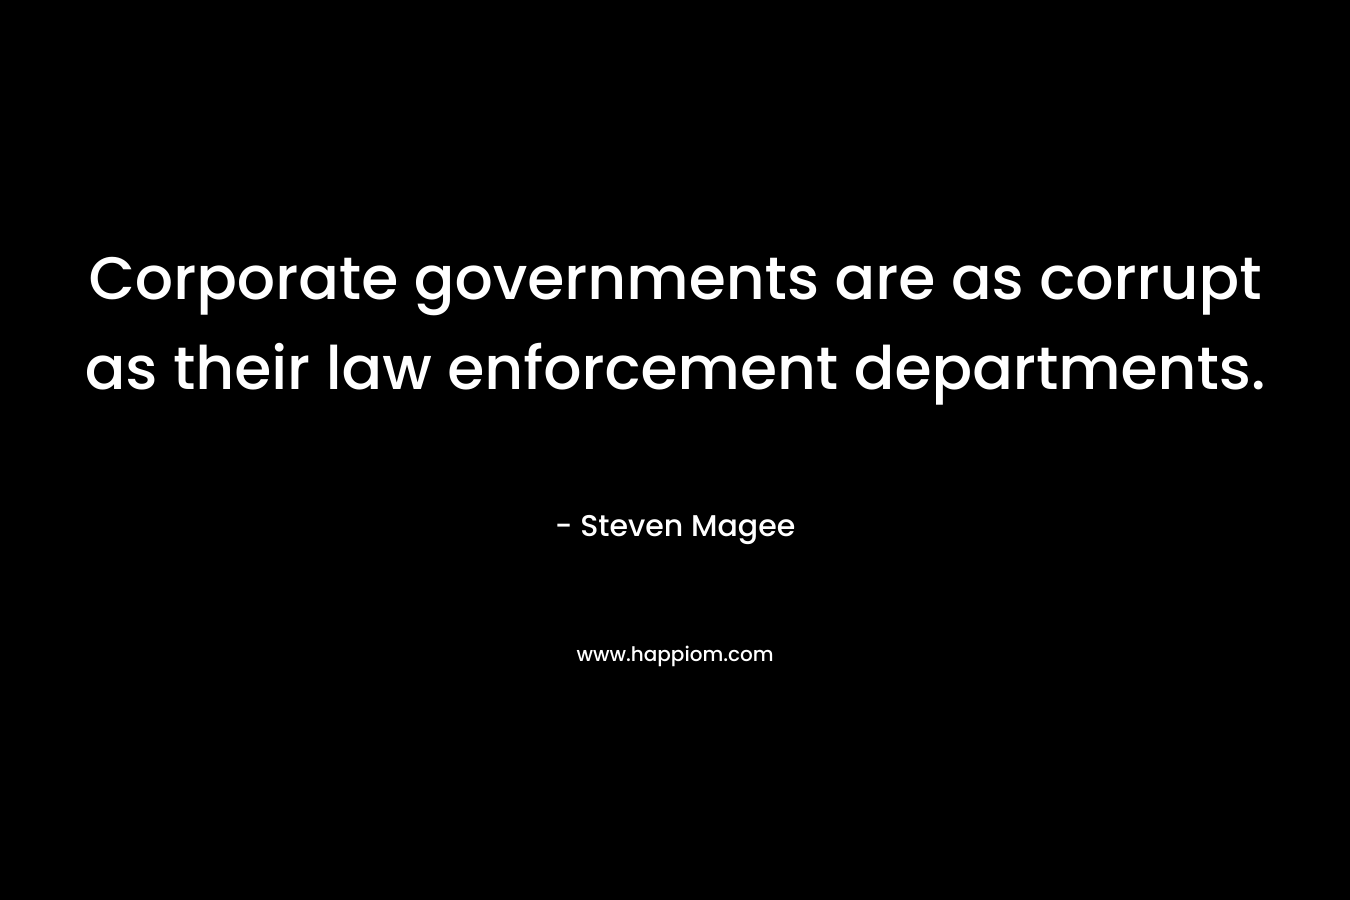 Corporate governments are as corrupt as their law enforcement departments.